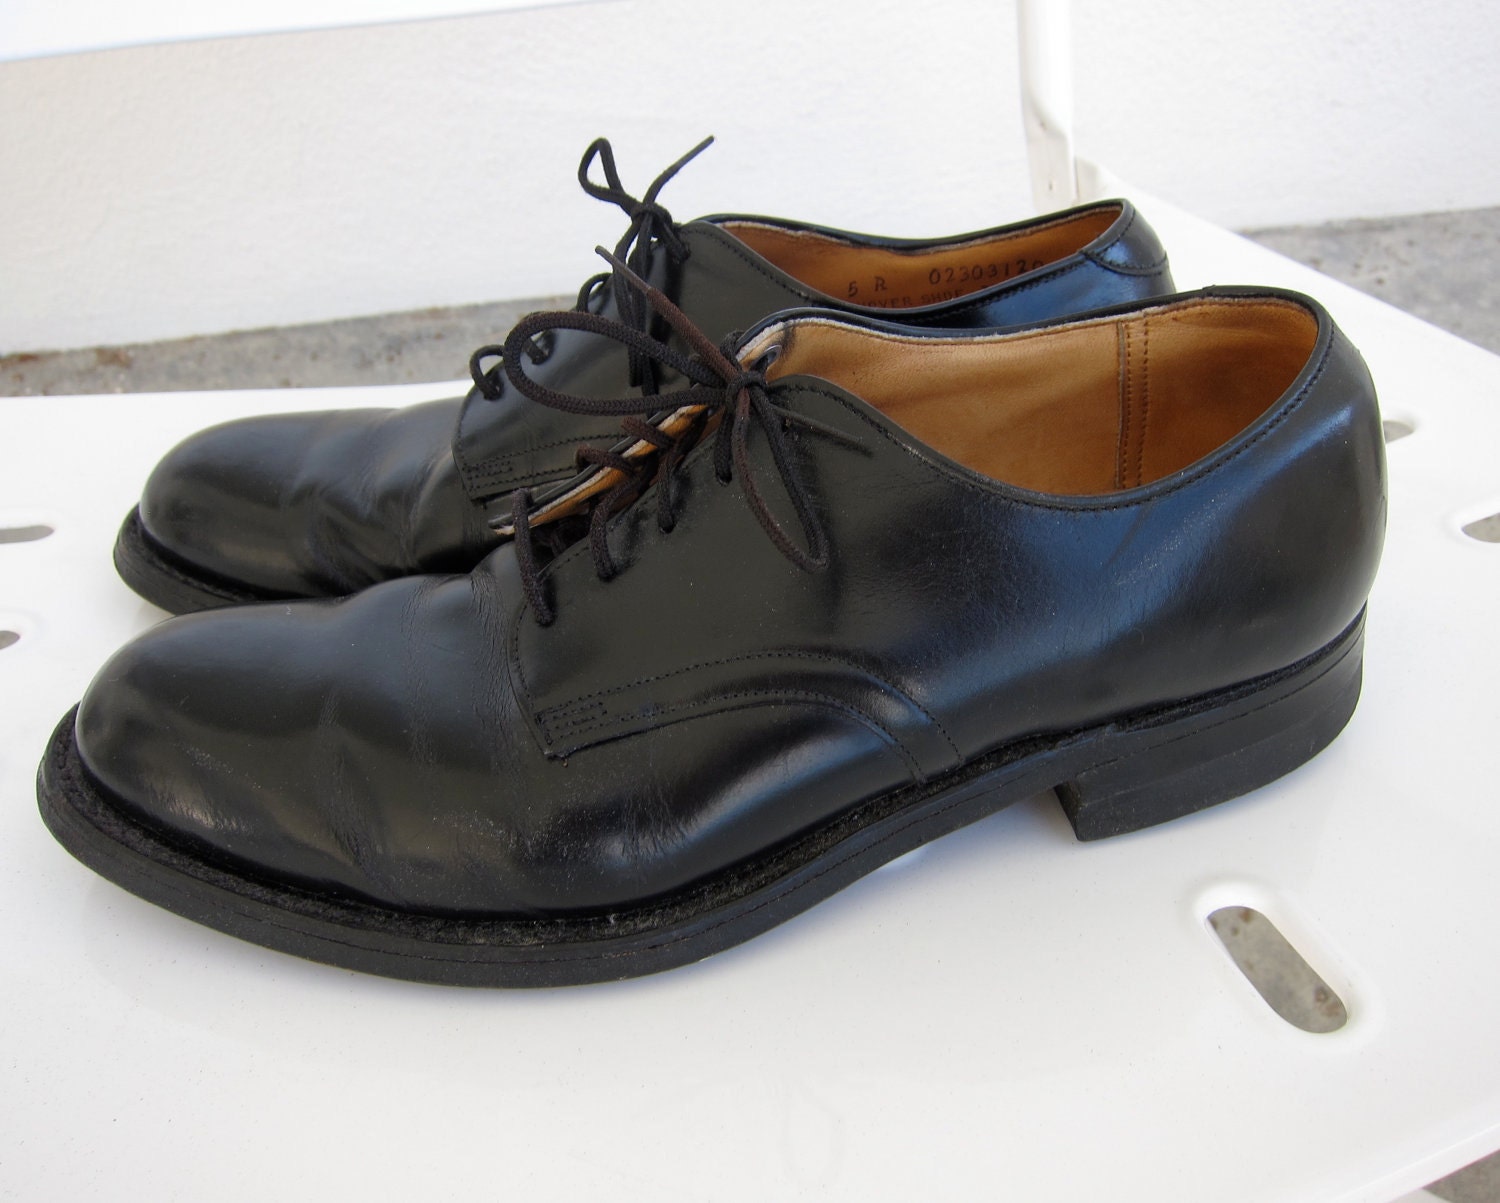 70s Tomboy Punk Black Leather Shoes / Vintage by JoulesVintage